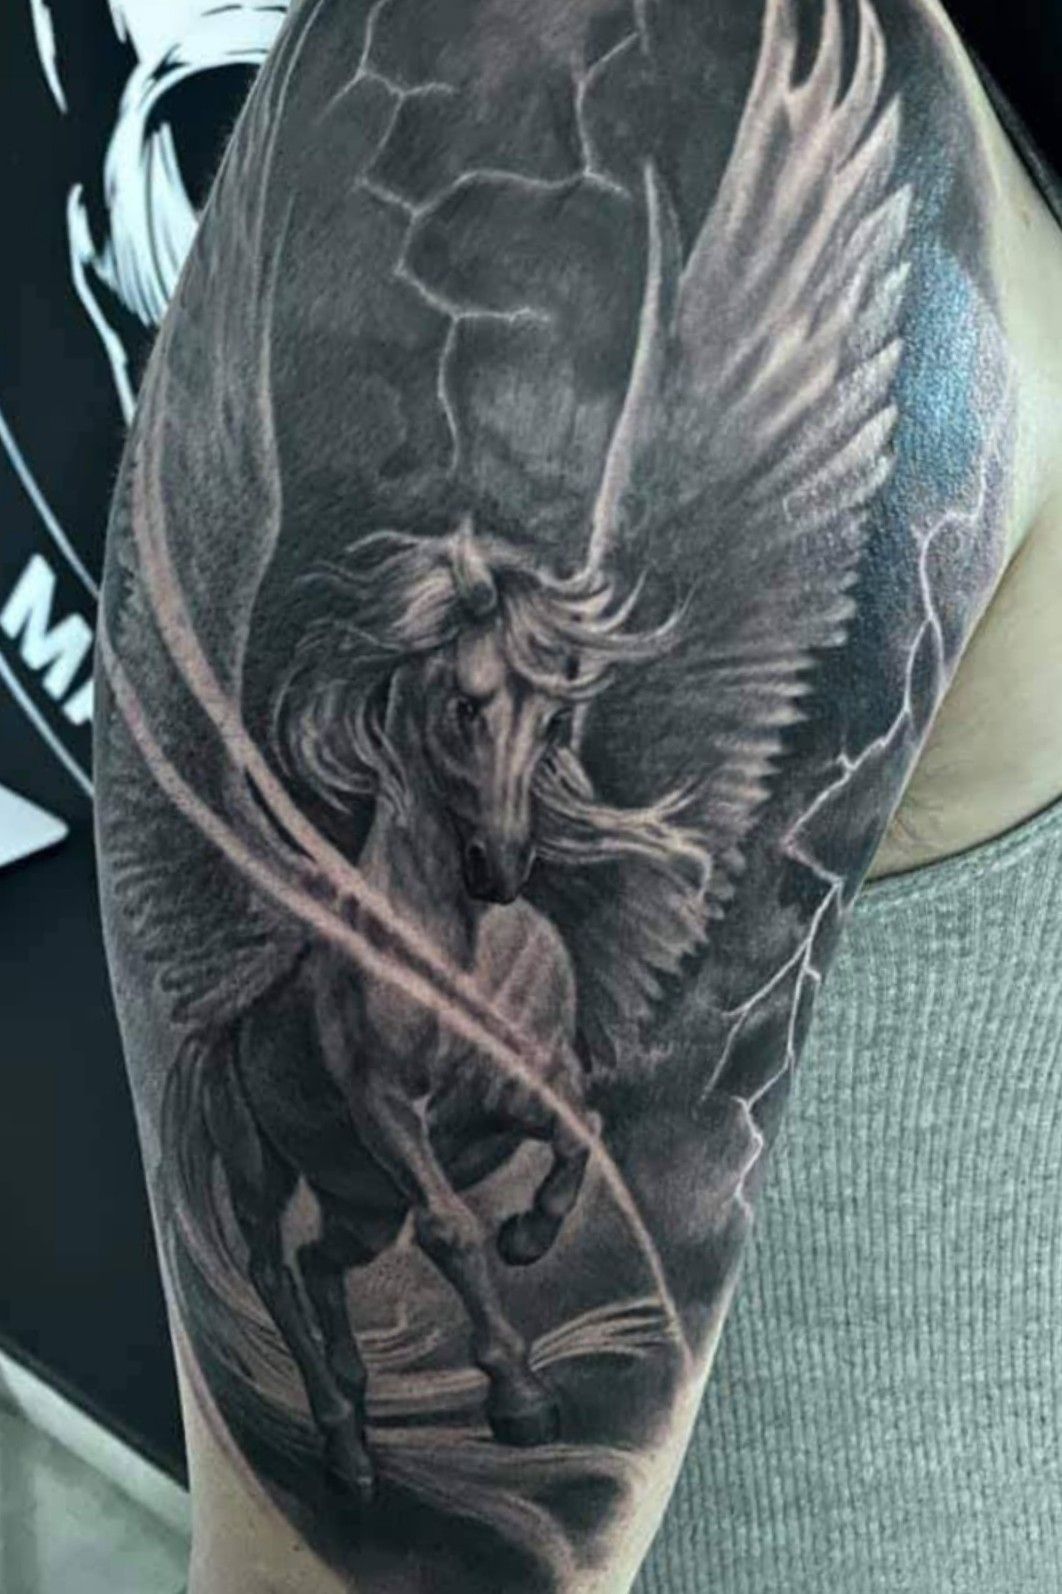 Alan Morris Tattoo - #Pegasus is thought to carry #Zeus' thunderbolts  through the sky. Pegasus is the best-known winged #horse in #mythology. So  yea, he's kind of a big deal. 🦄 Thanks